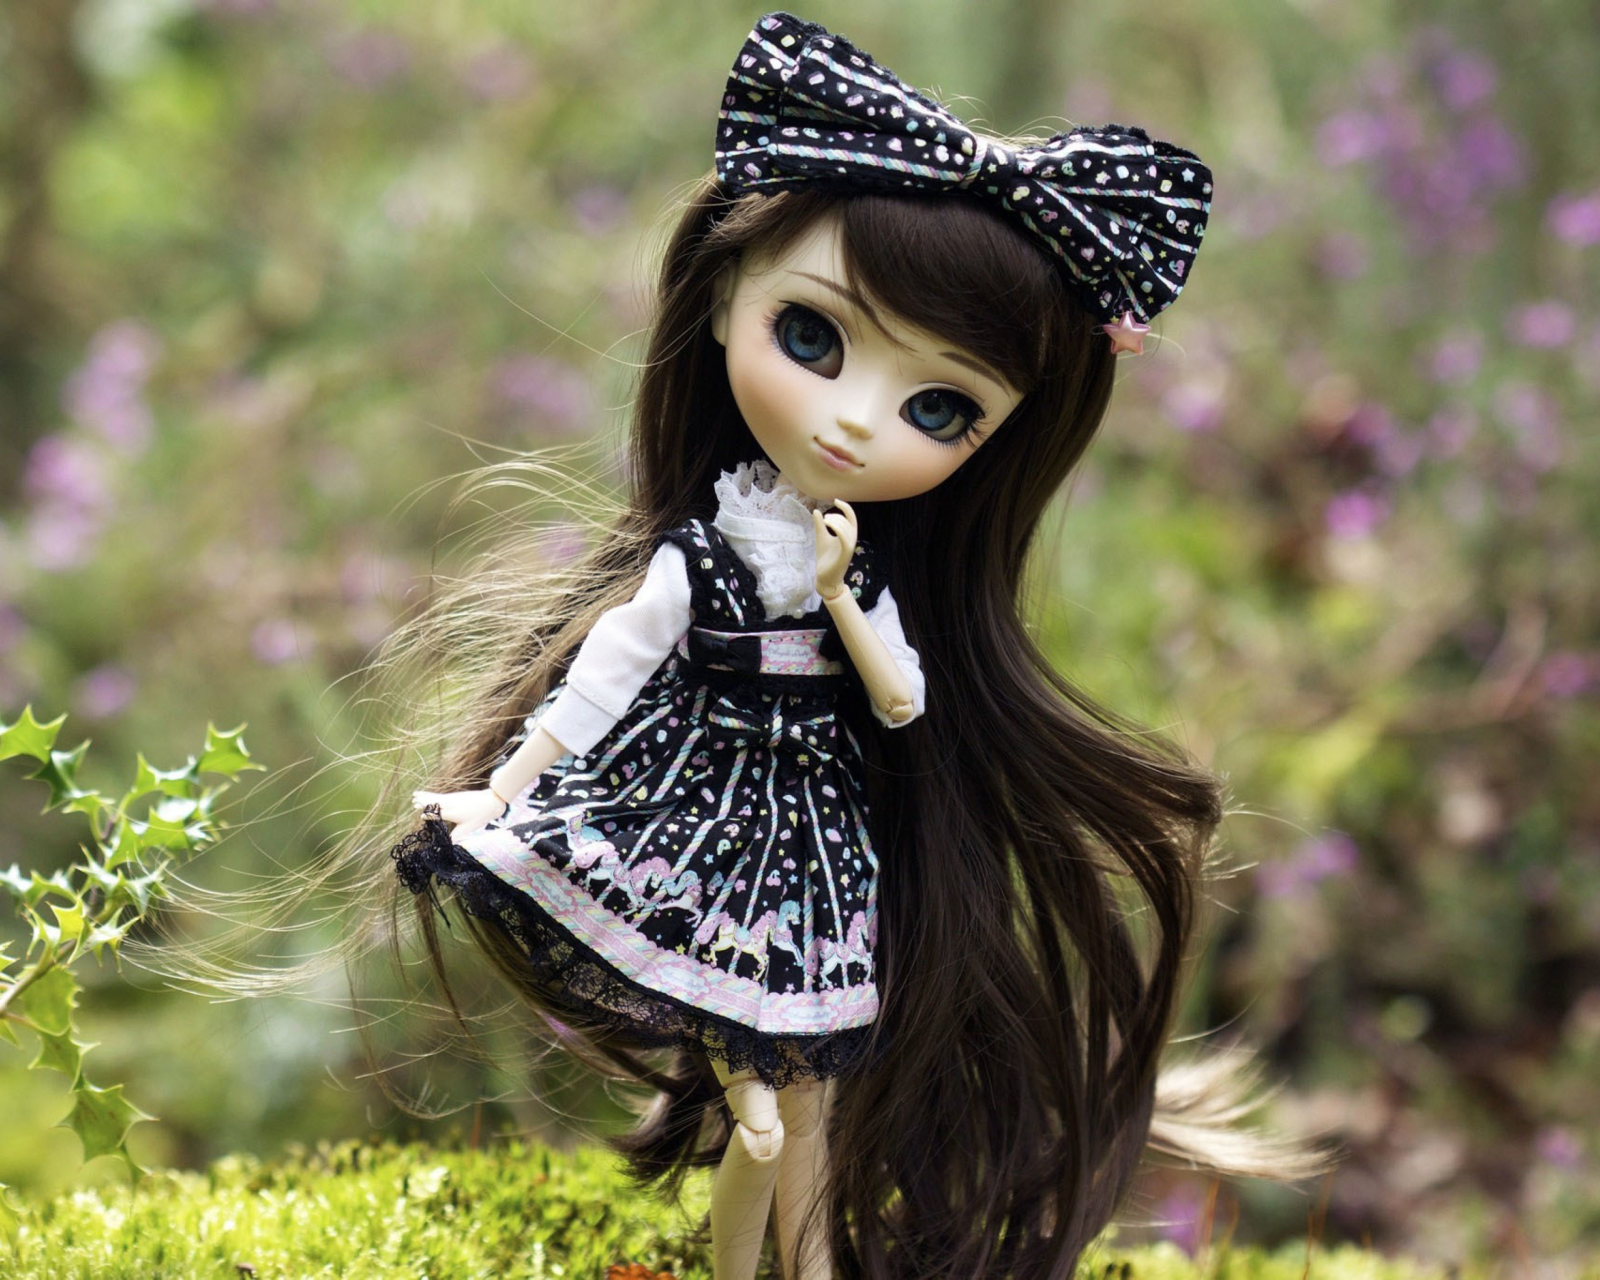 Cute Doll With Dark Hair And Black Bow wallpaper 1600x1280